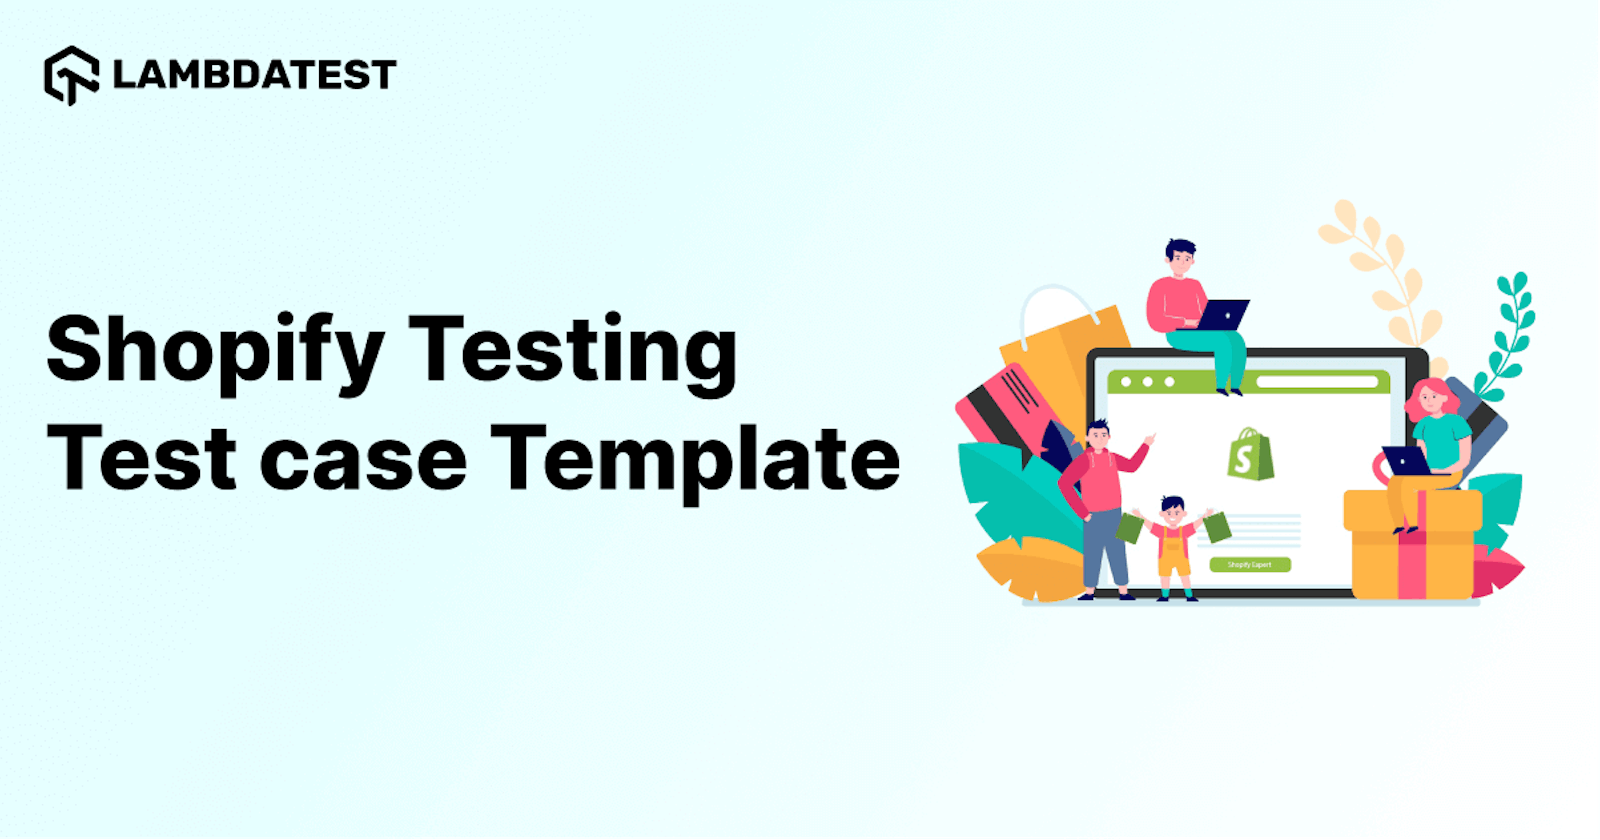 Shopify Testing Test case Template: Top 101+ Shopify Test Cases